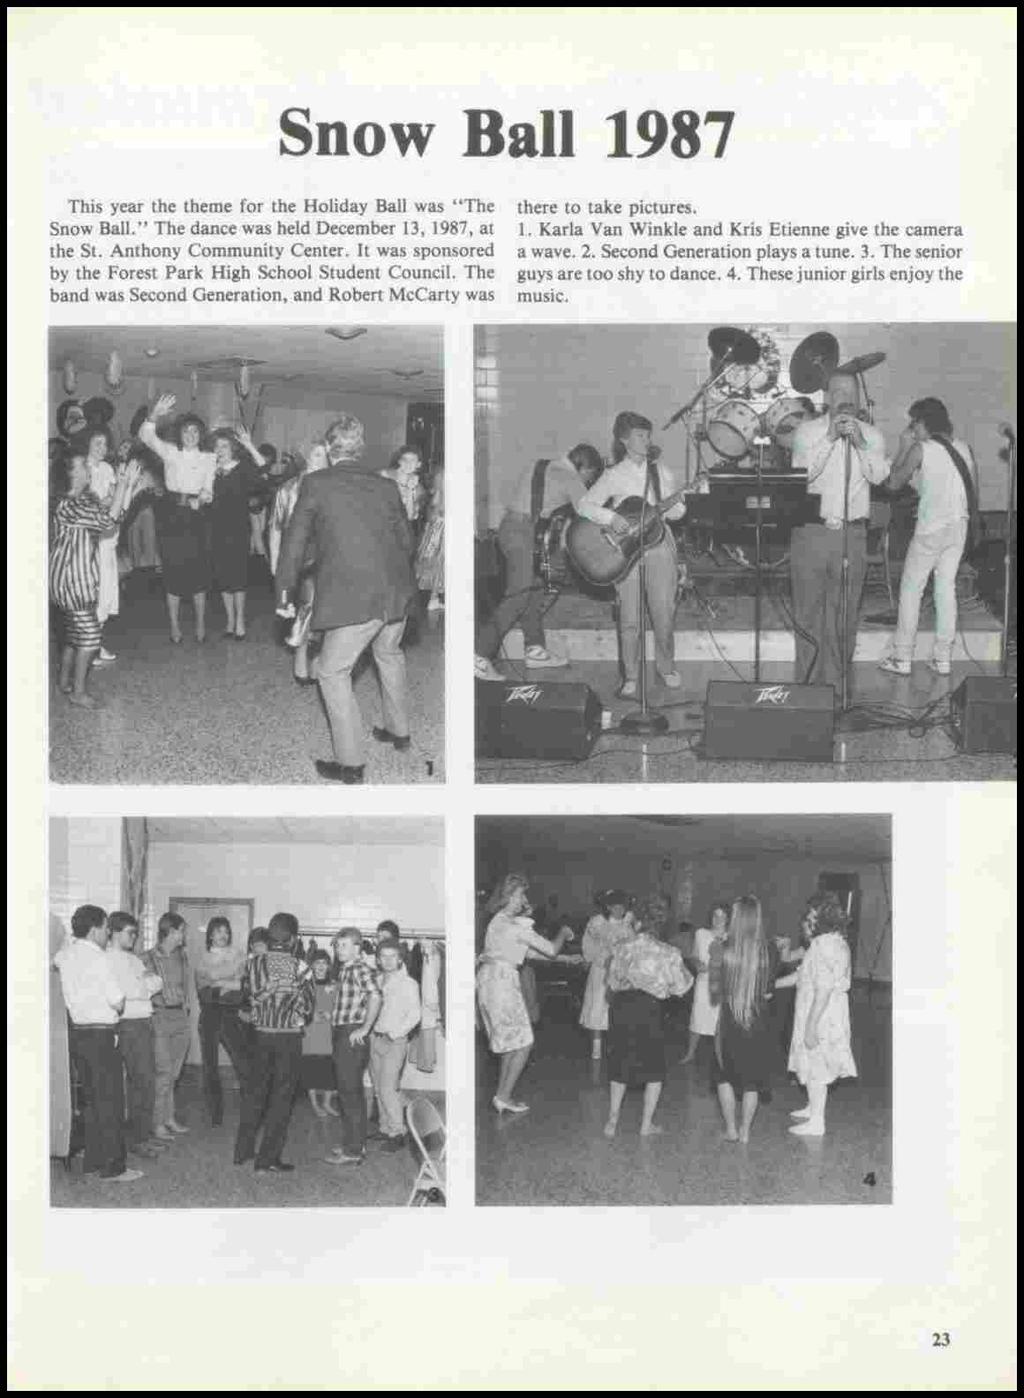 Snow Ball 1987 This year the theme for the Holiday Ball was ''The Snow Ball." The dance was held December 13, 1987, at the St. Anthony Community Center.